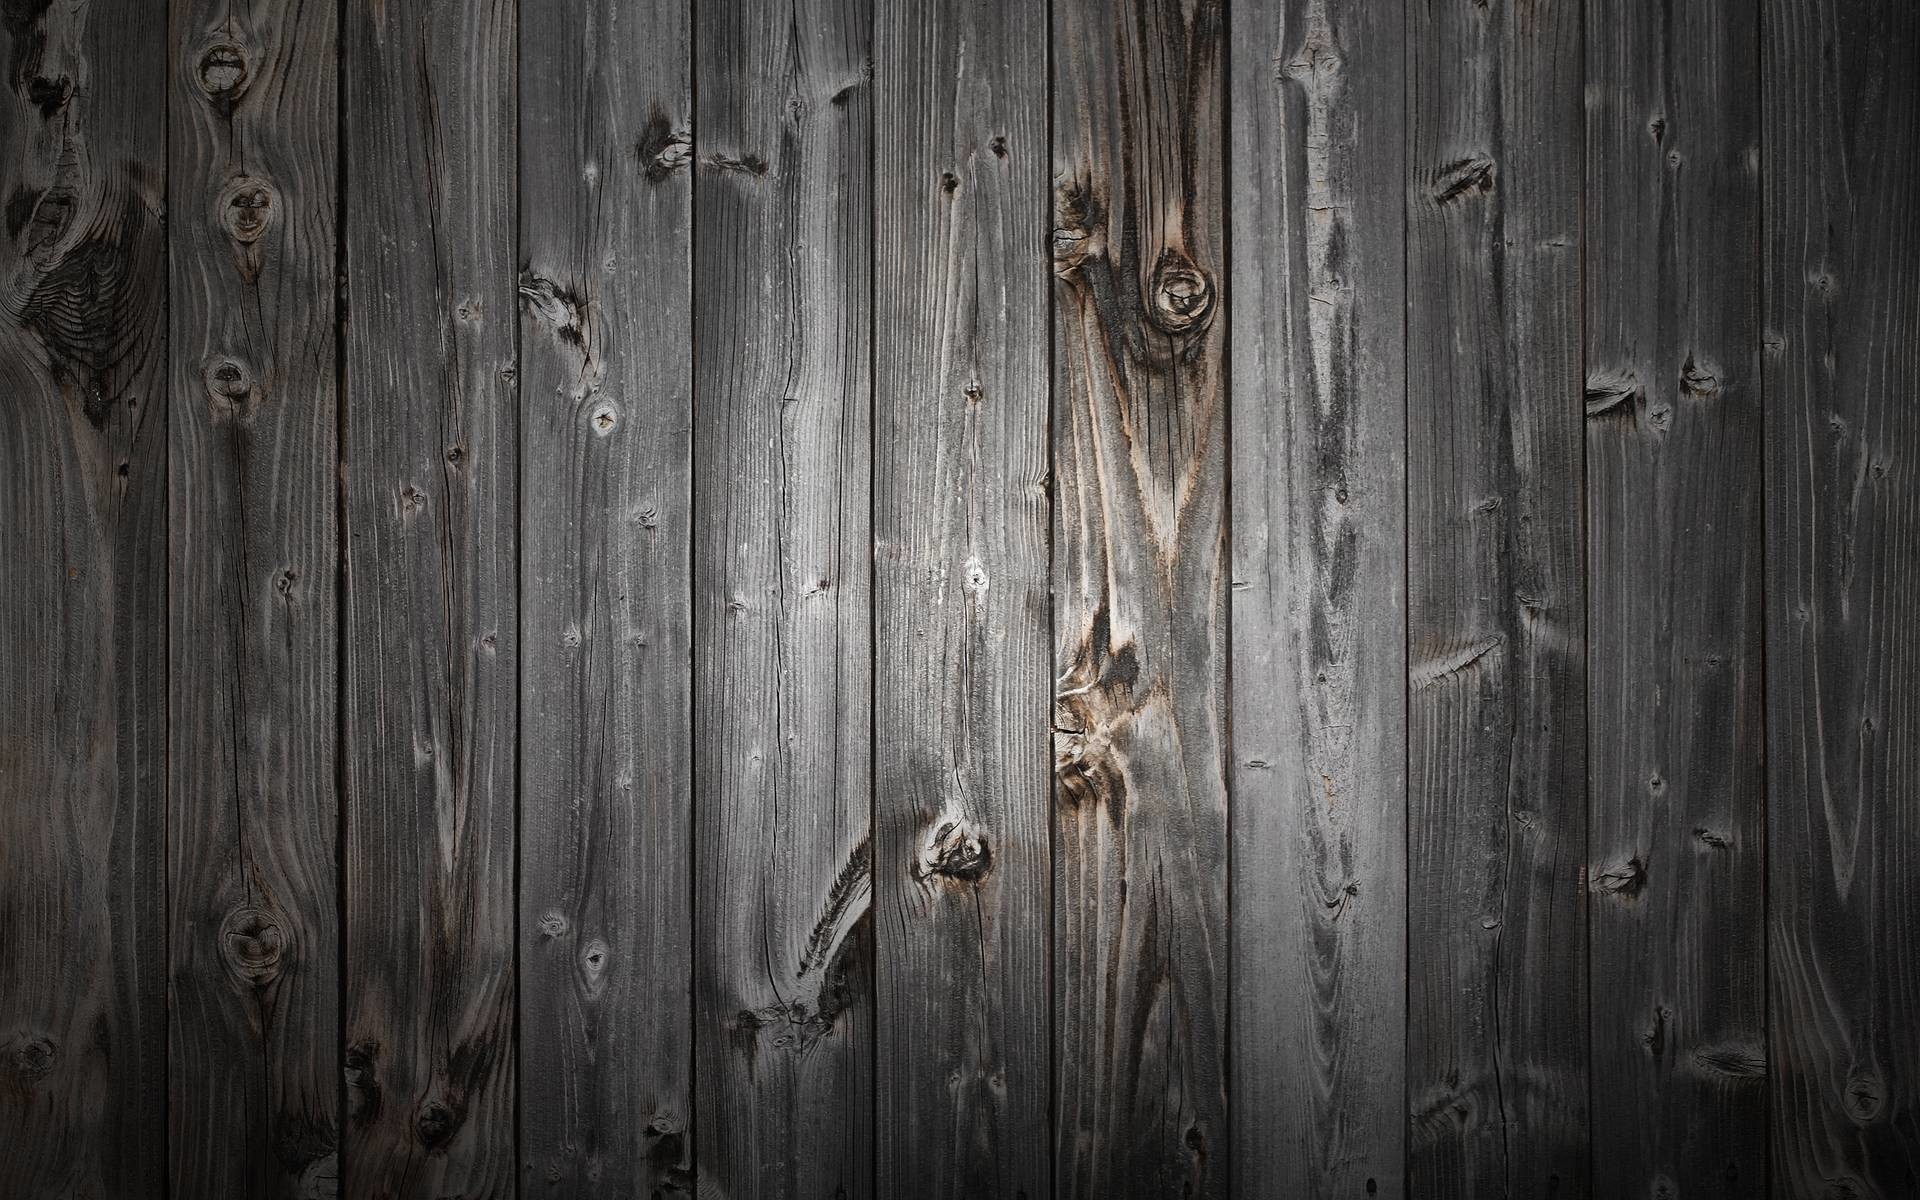 Collection Of Wood Wallpaper Hd On Hdwallpapers 1920ã—1200 - Cool Wood  Backgrounds - 1920x1200 Wallpaper 